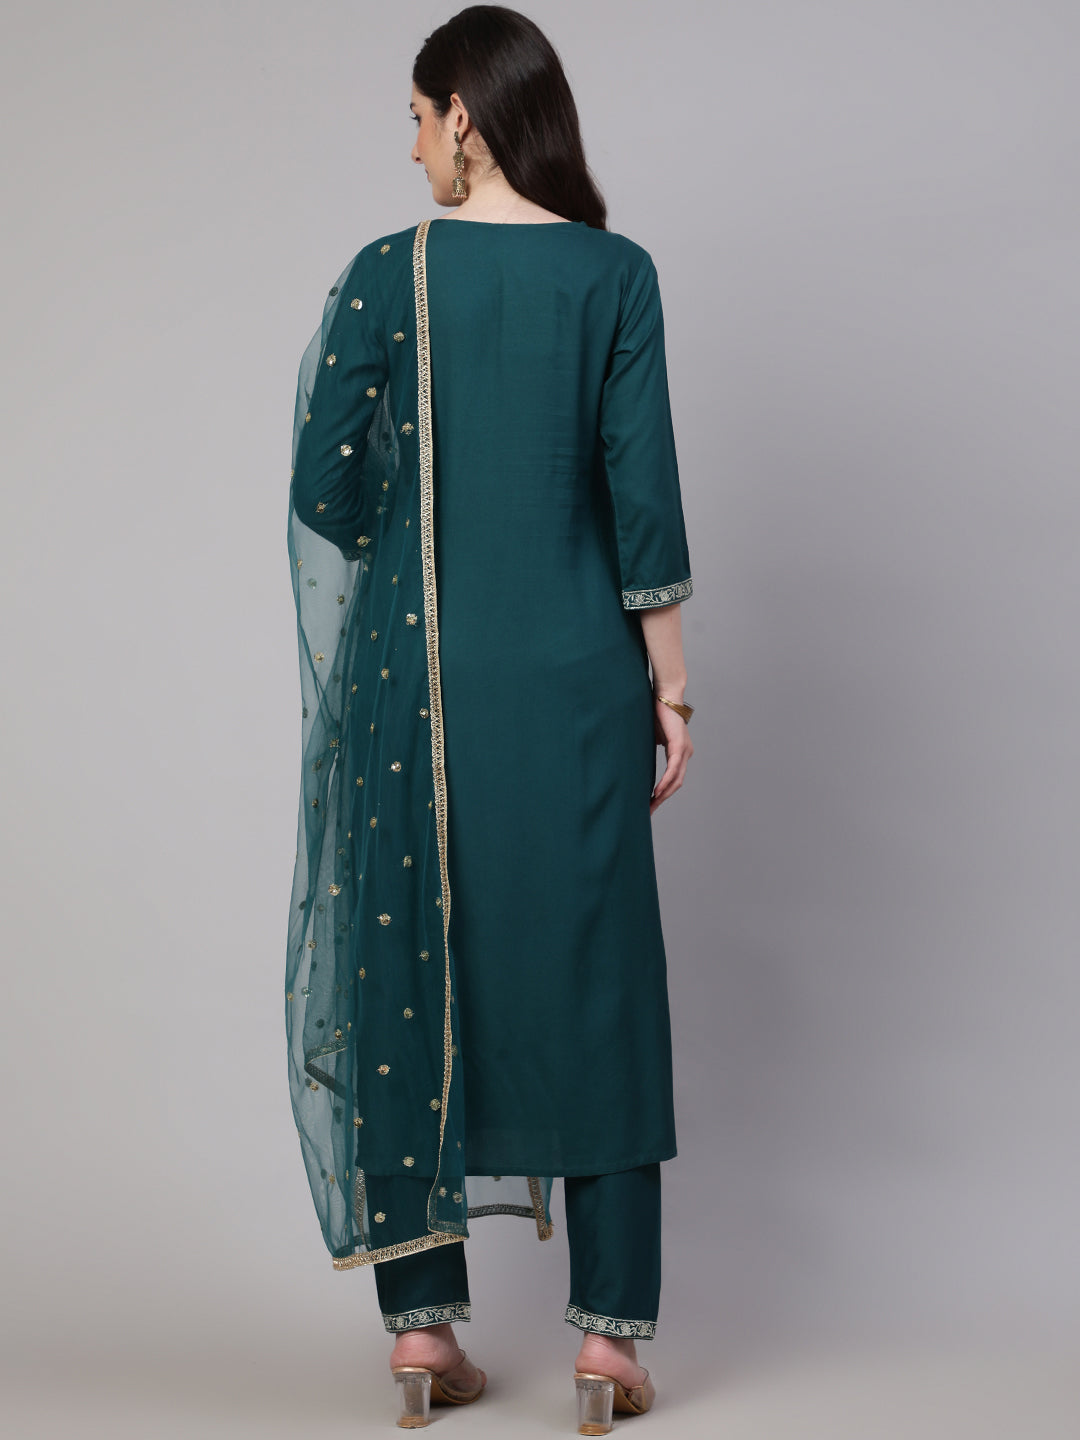 Women's Green Embroidered Straight Kurta With Trouser And Net Dupatta - Nayo Clothing